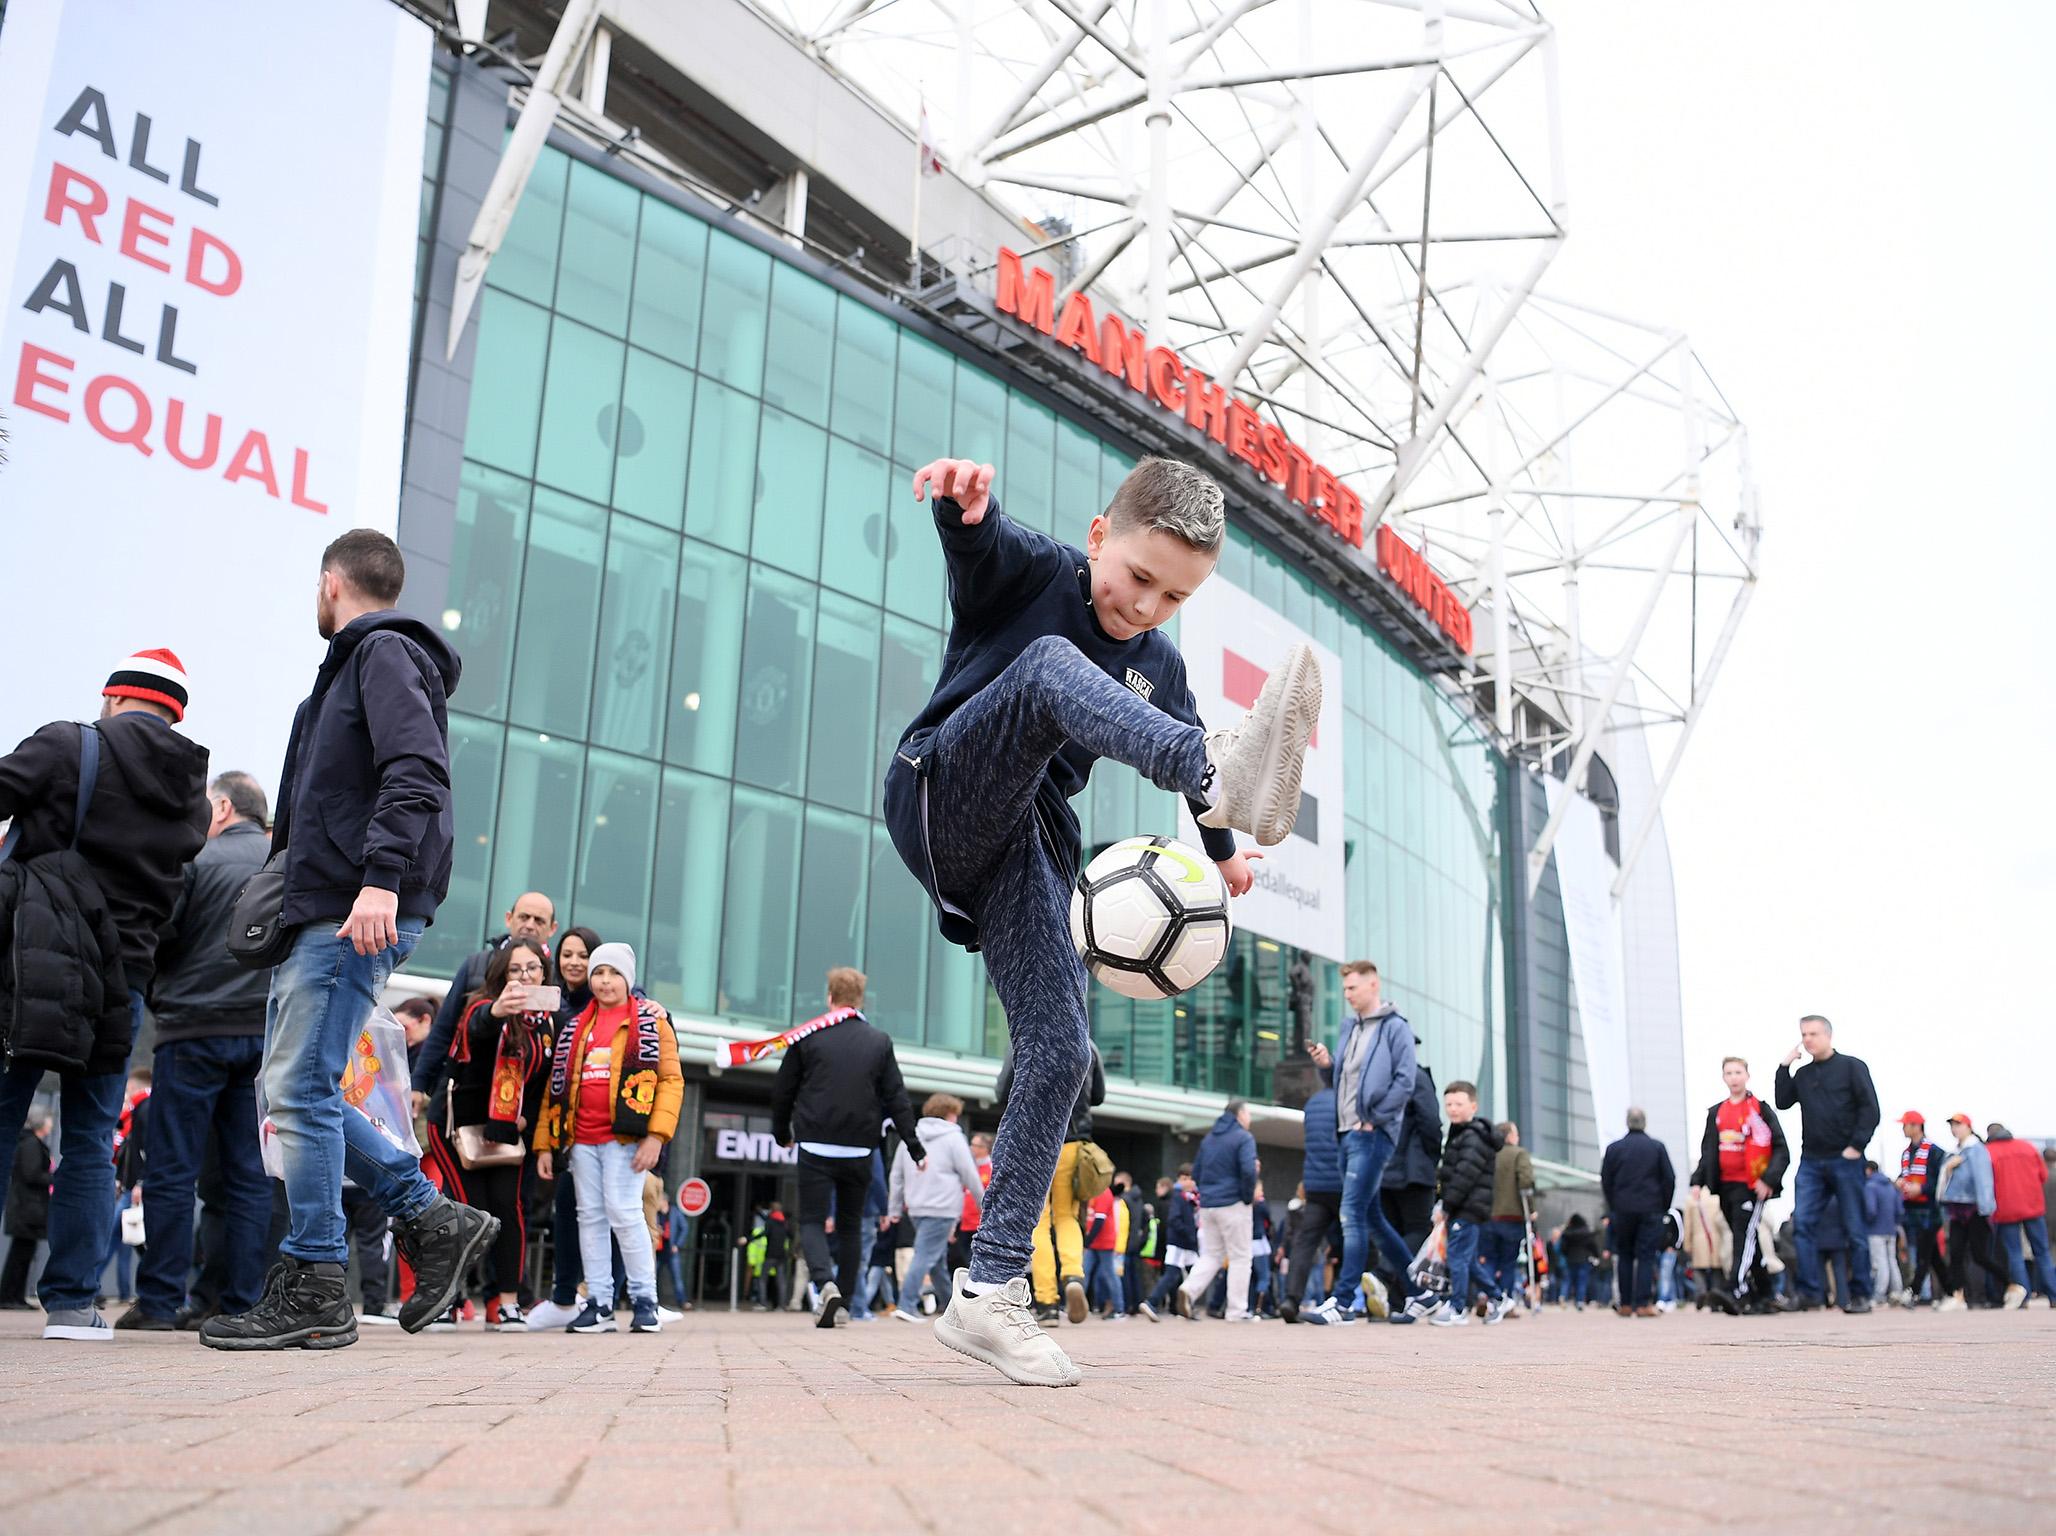 There is a clash of short-term and long-term thinking at Old Trafford